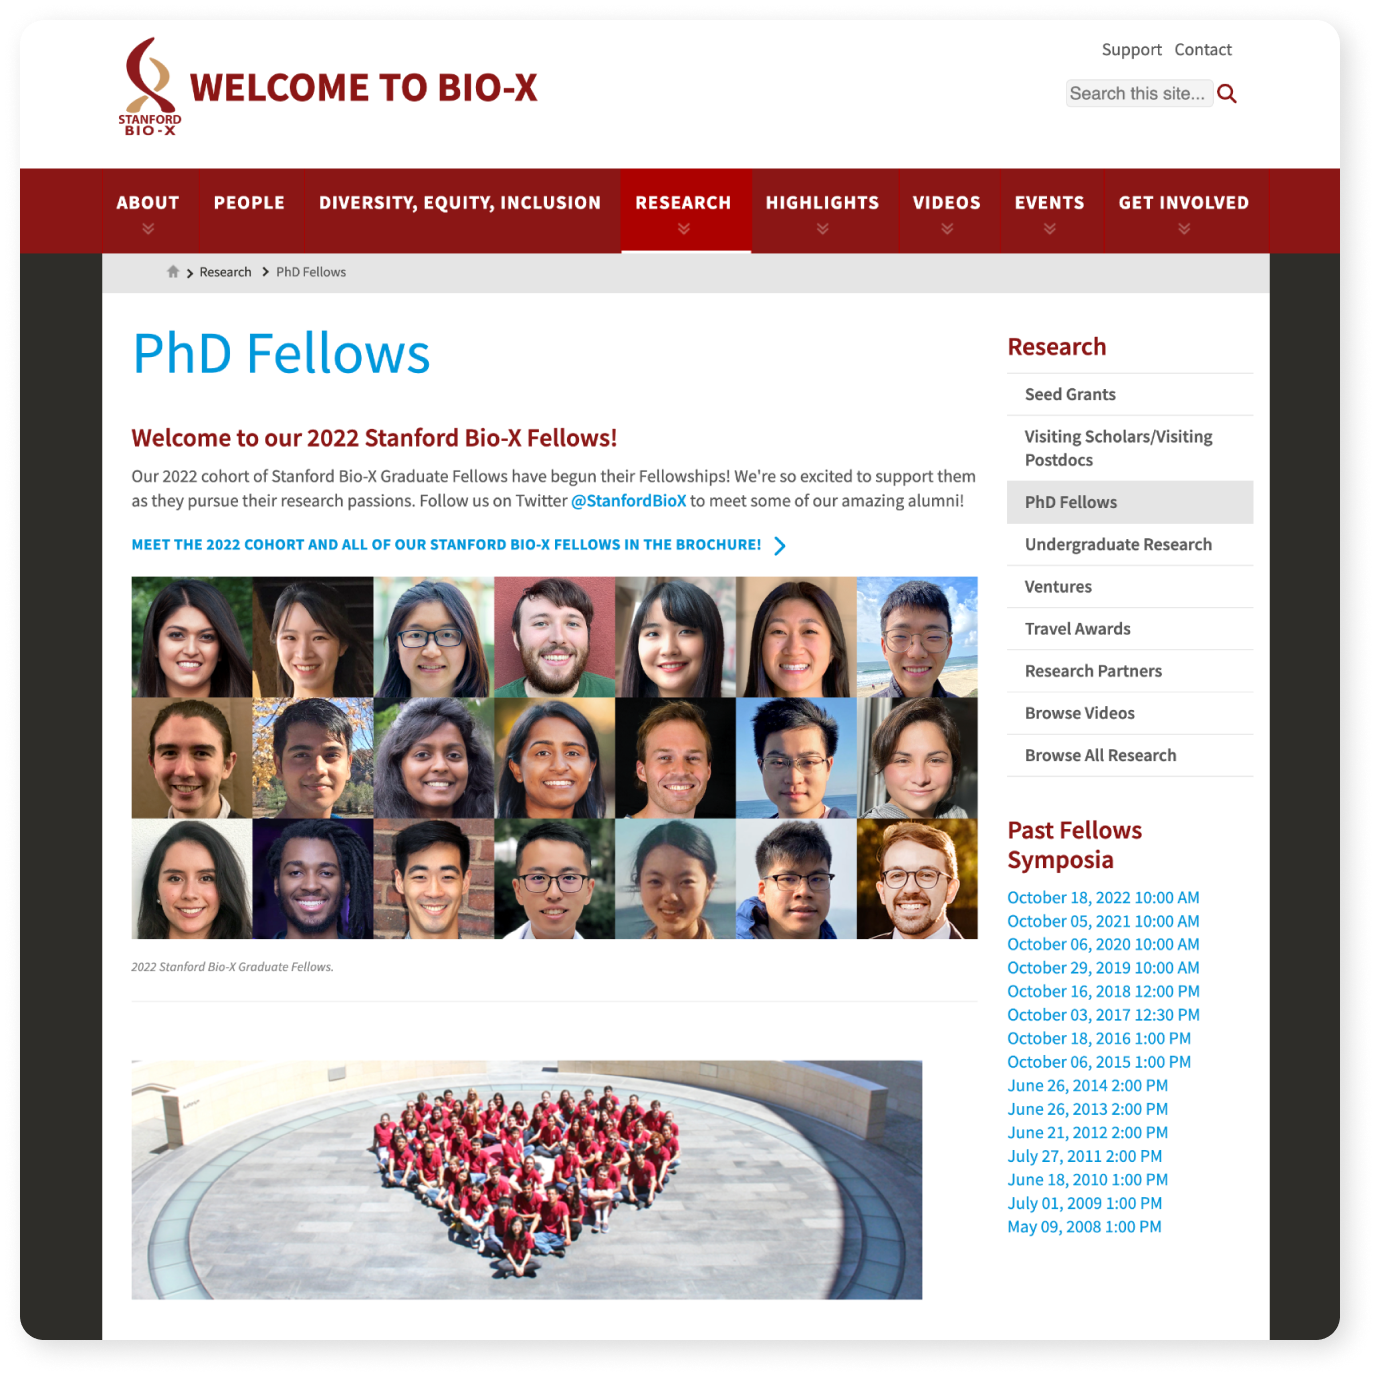 Screenshot of the PhD fellow page of the site